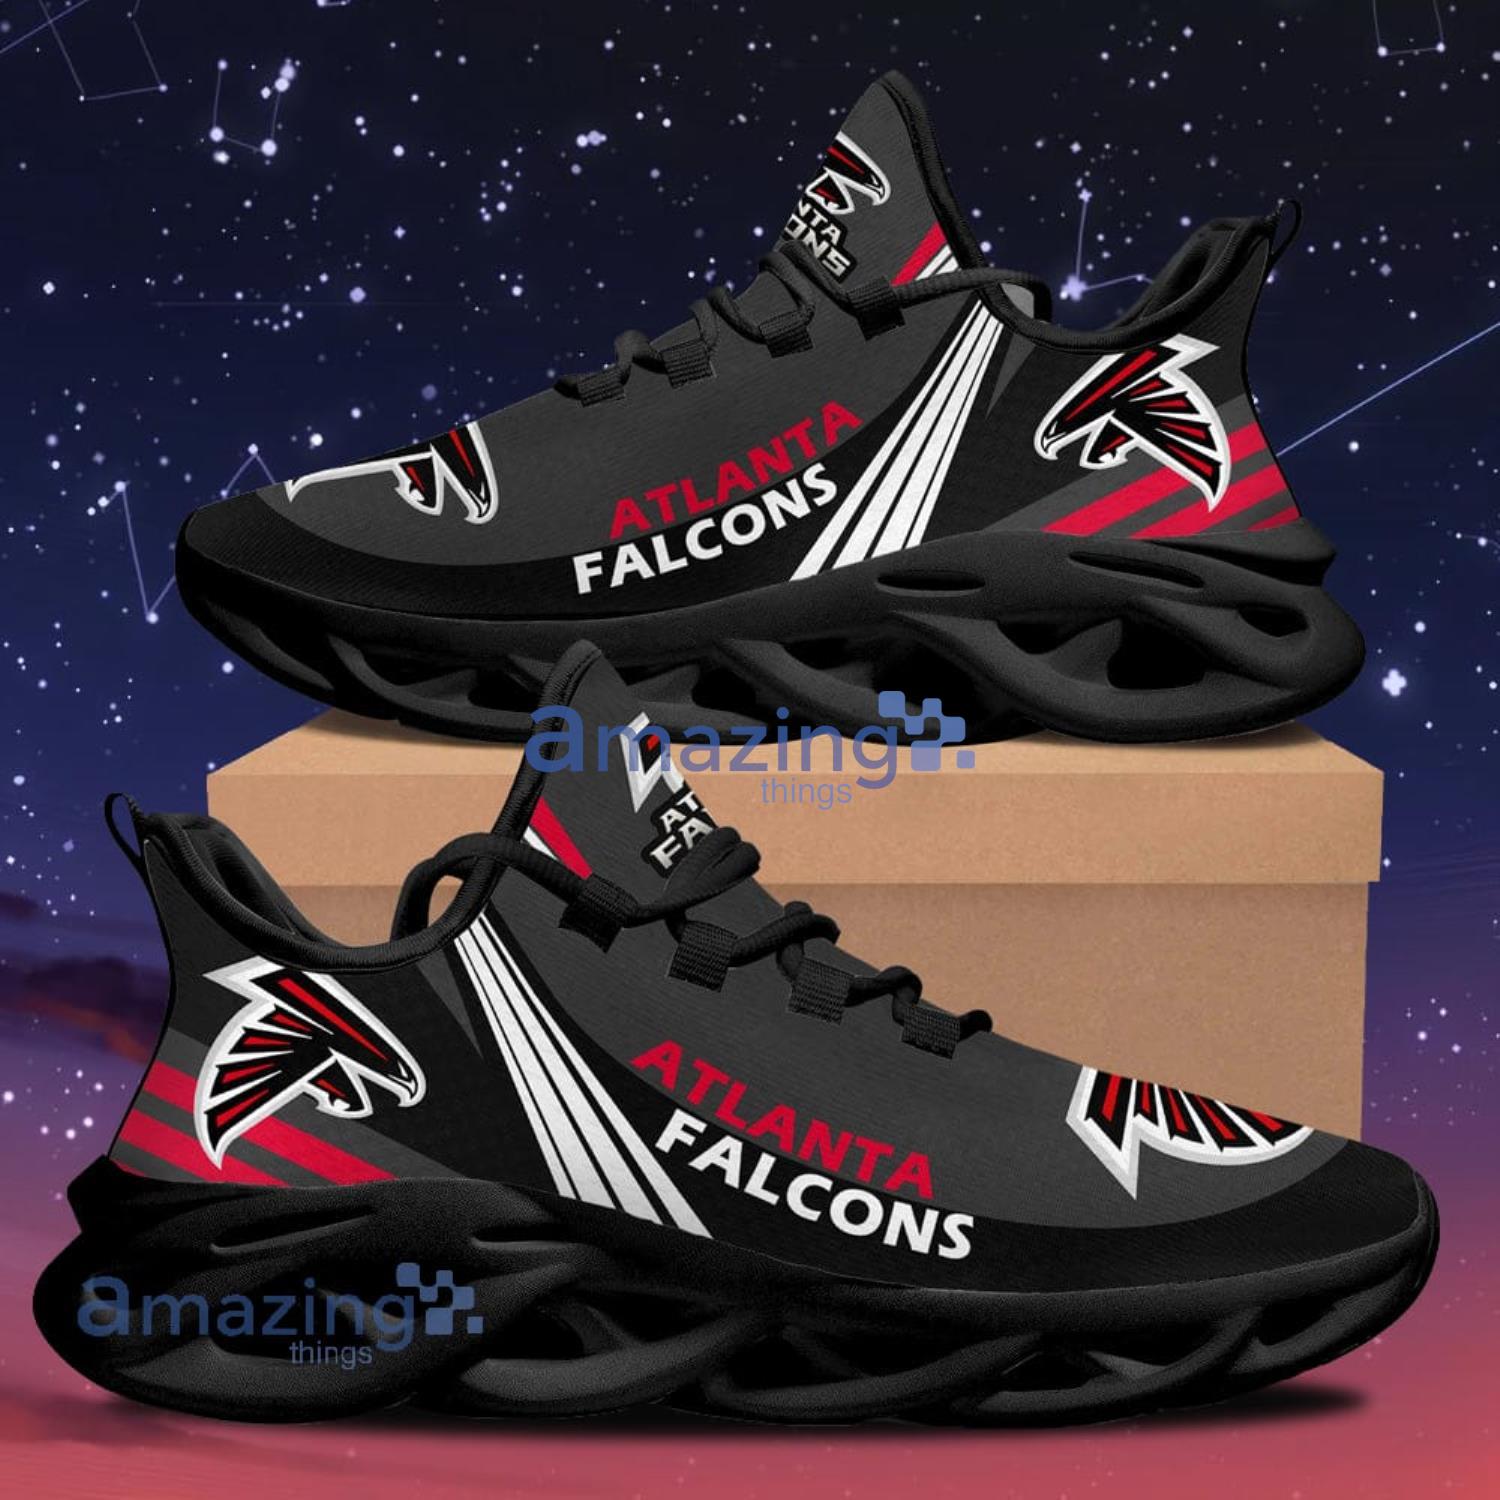 Atlanta Falcons New Trend Max Soul Shoes Running Sneakers Product Photo 1